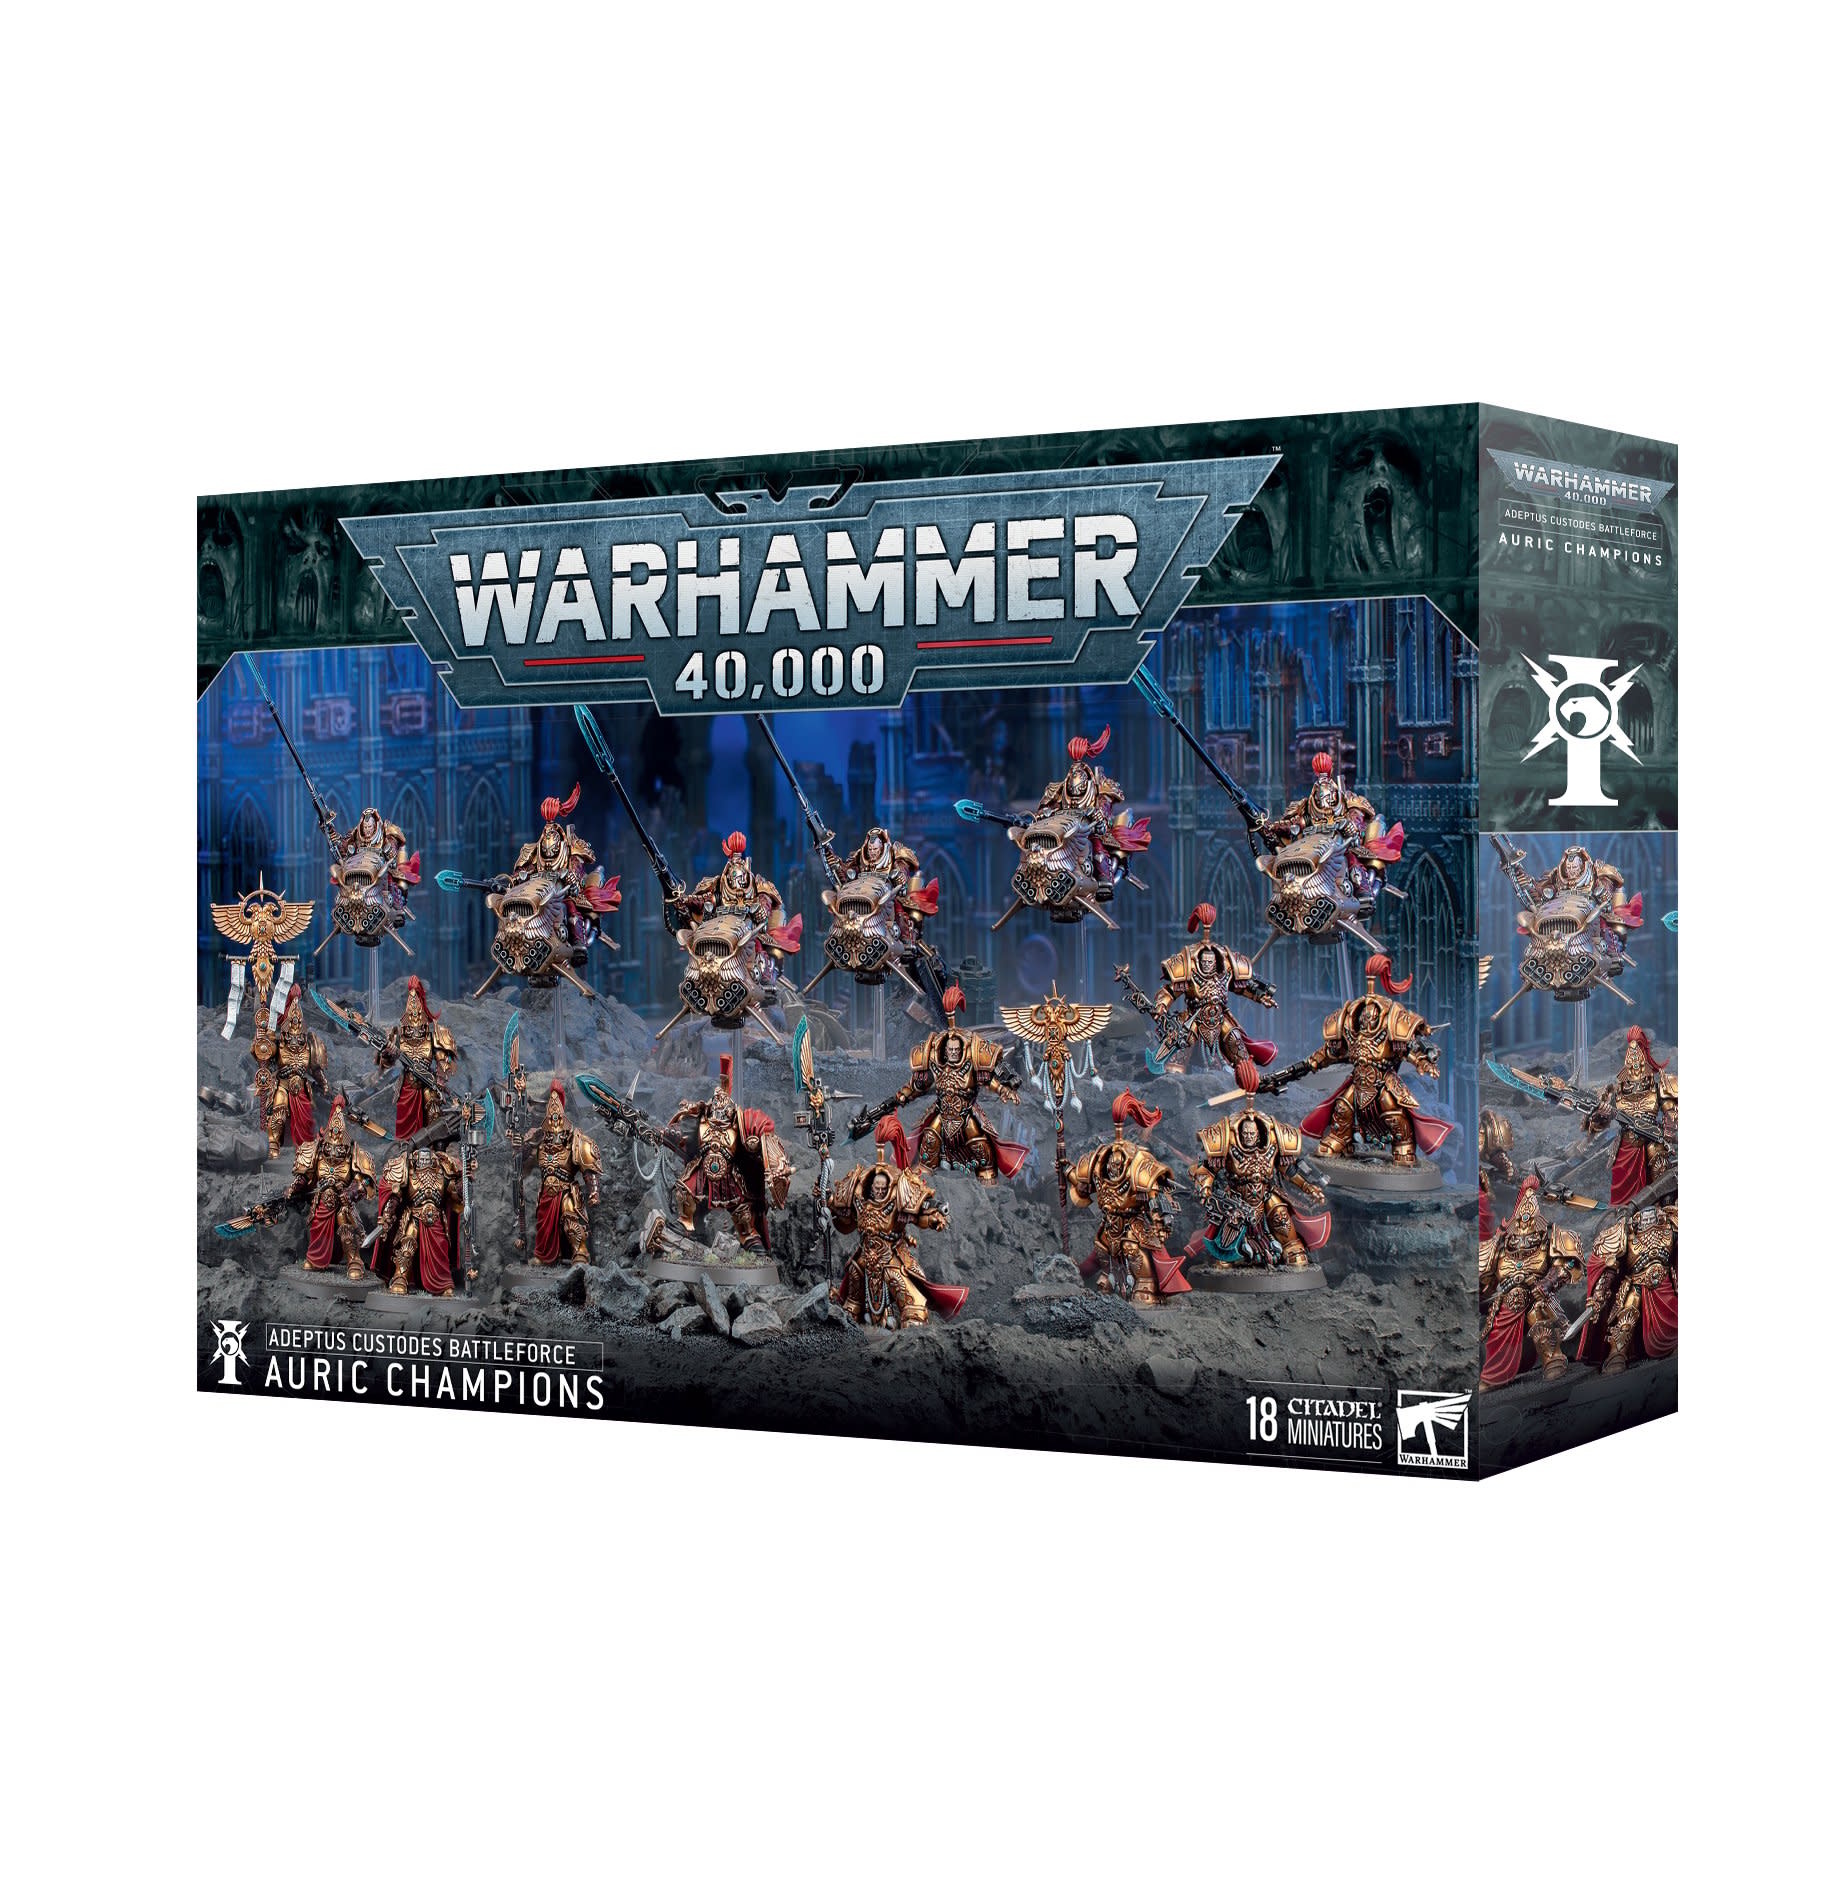 Warhammer 40,000: Battle Forces Auric Champions